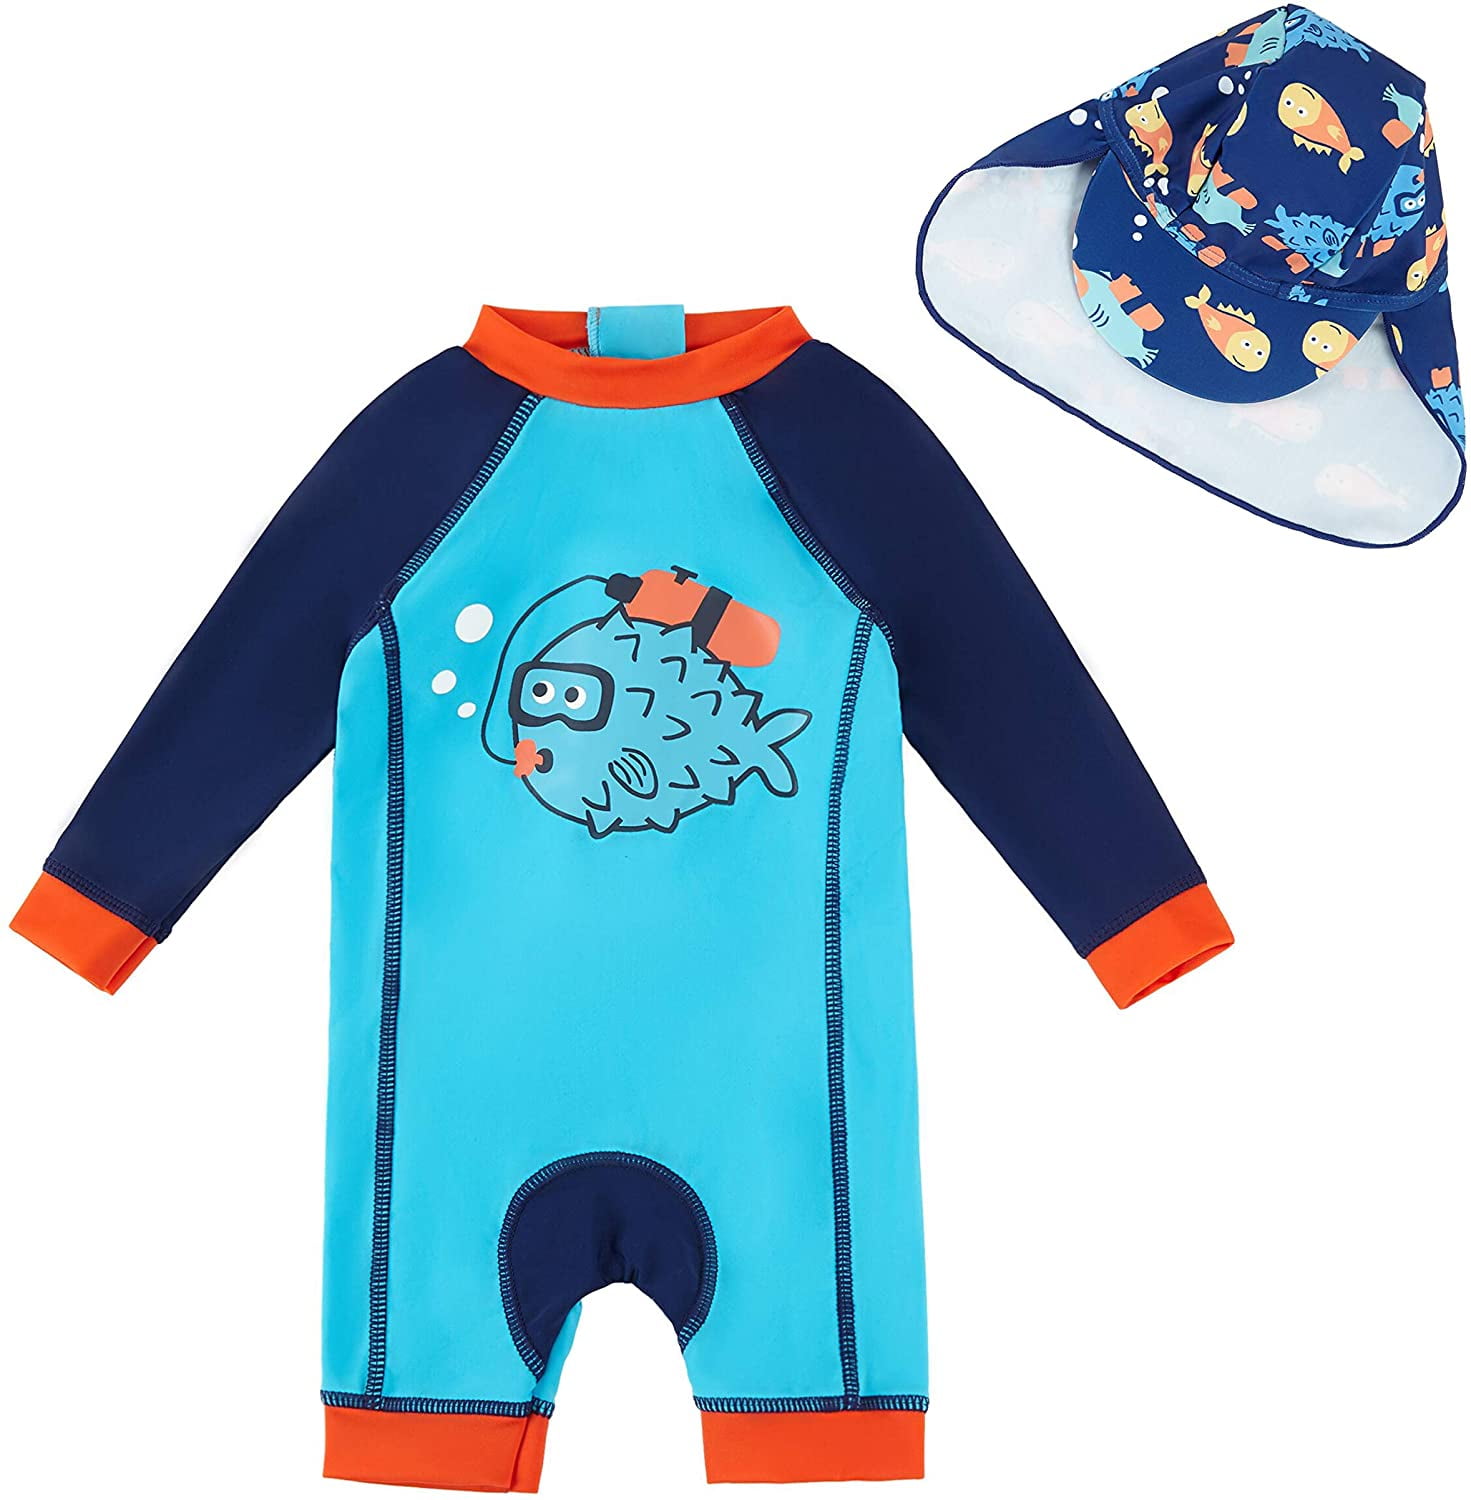 Sun Protection Baby Swimsuit upandfast Baby/Toddler One Piece Zip Sunsuit with Sun Hat UPF 50 